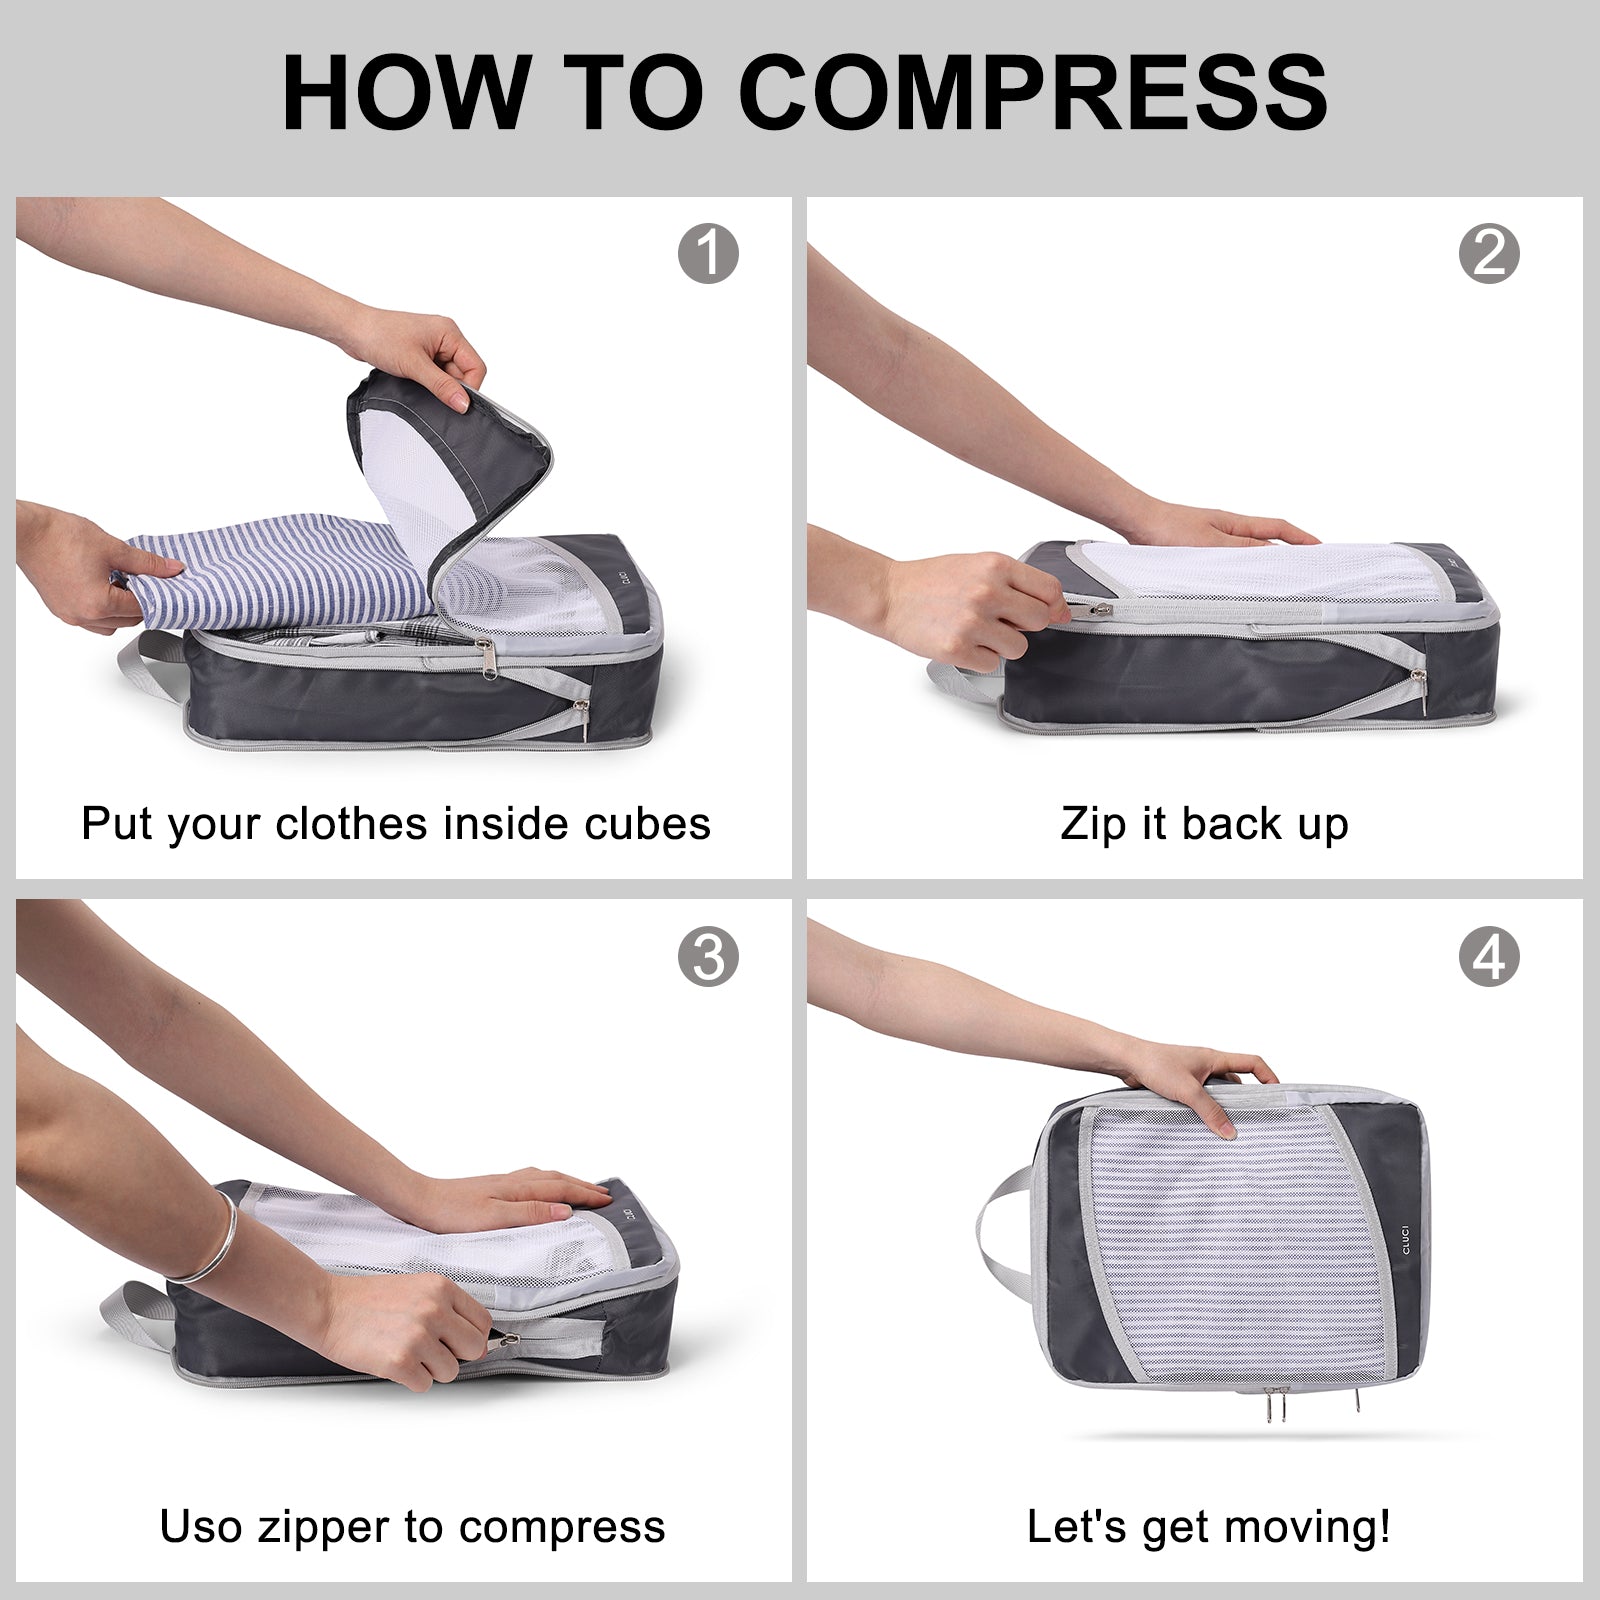 Compression Packing Cubes for Suitcase，CLUCI 4 Set Travel Essentials O